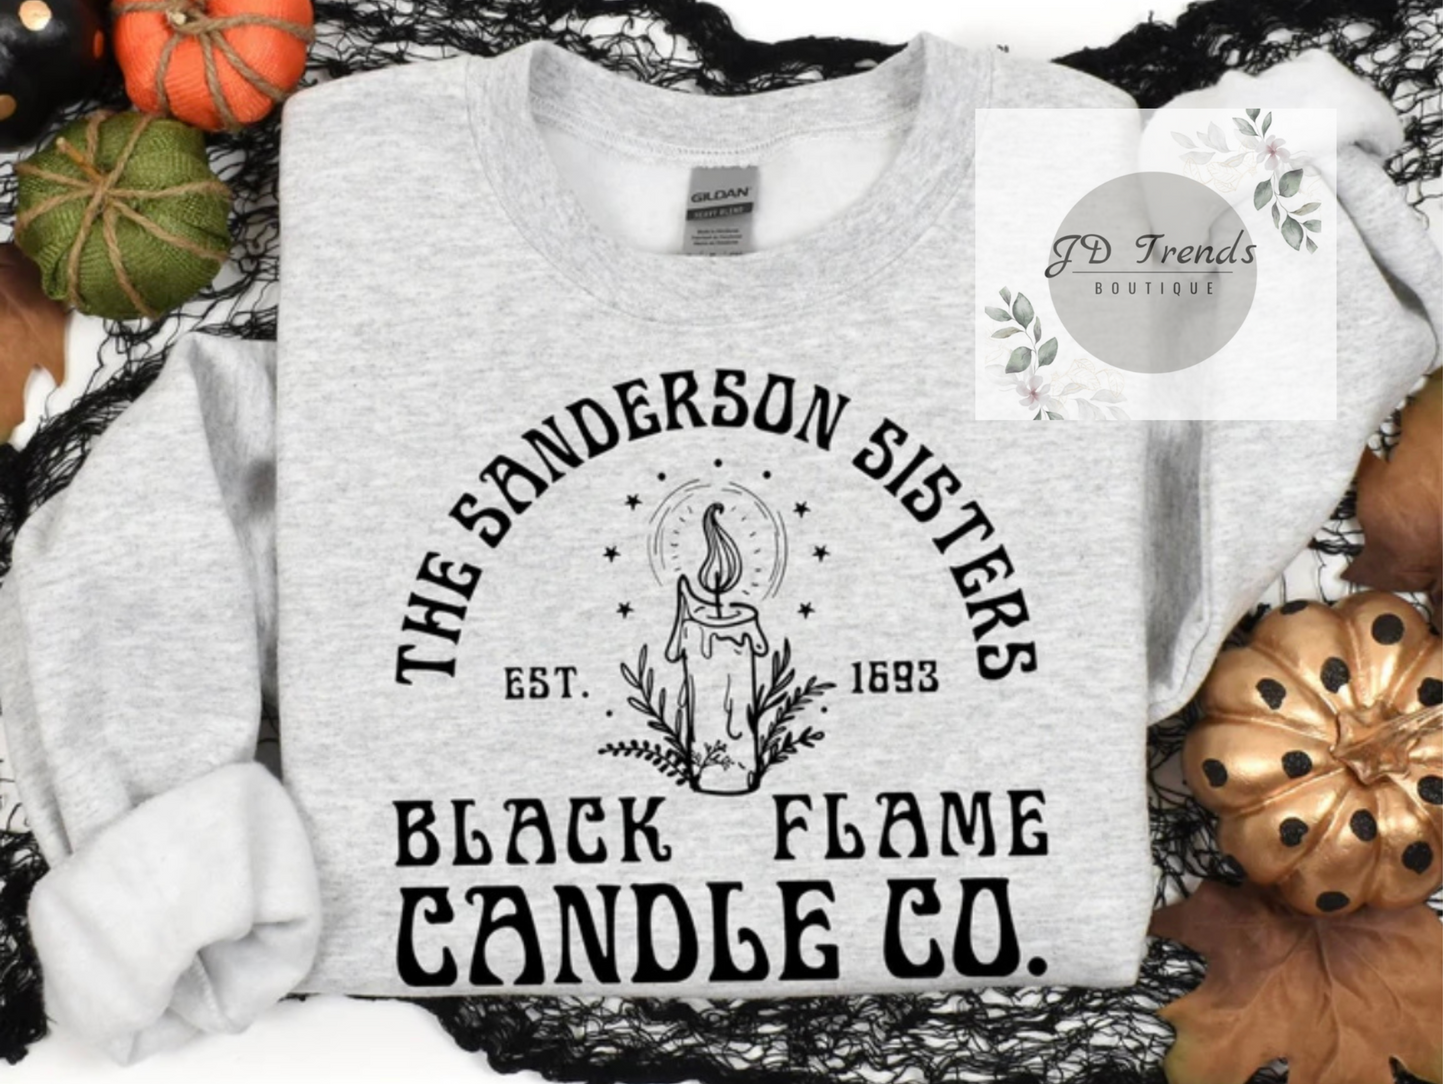 Sanderson Sister’s Candle Co.